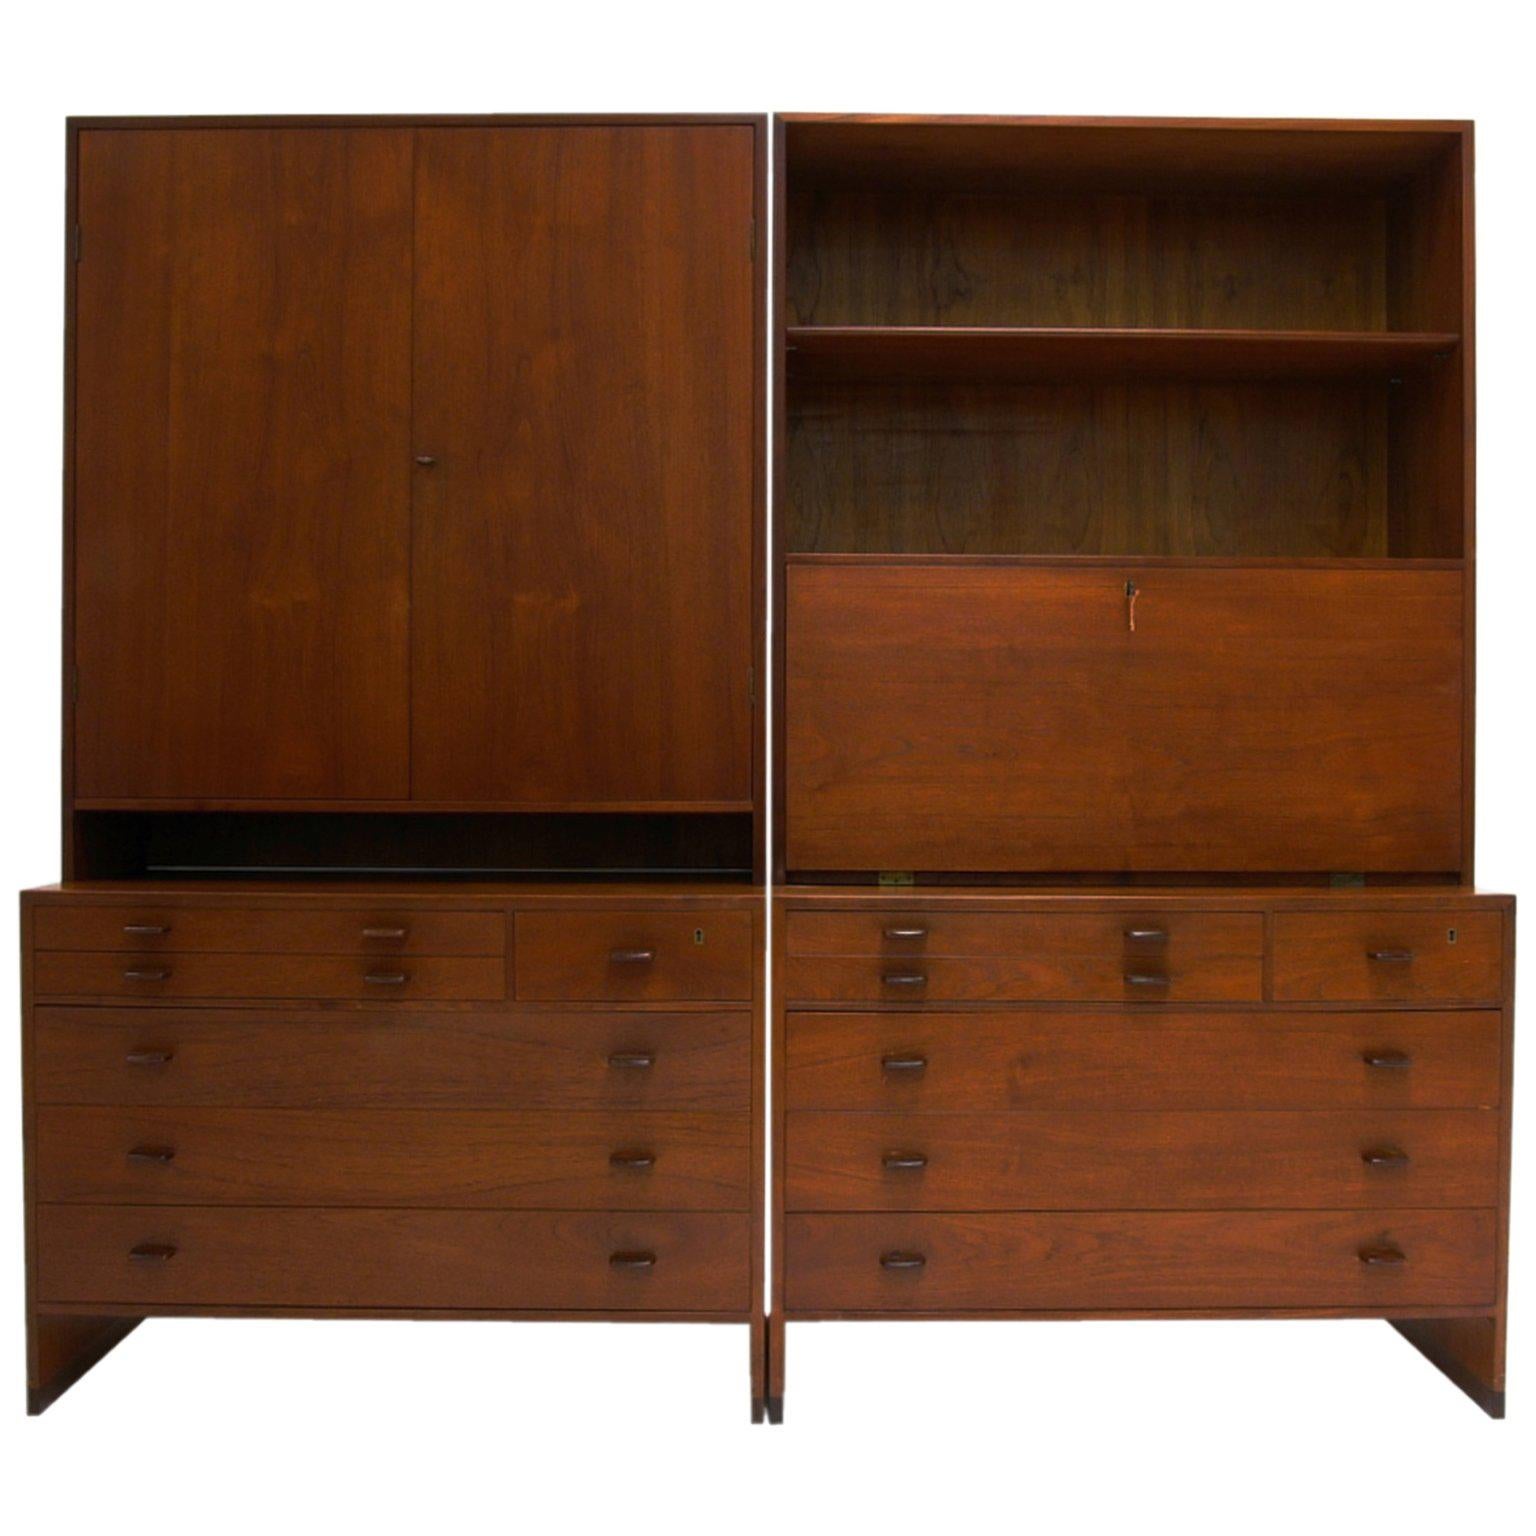 Monumental Hans J. Wegner for Ry Furniture Wall Unit with Chests and Secretary